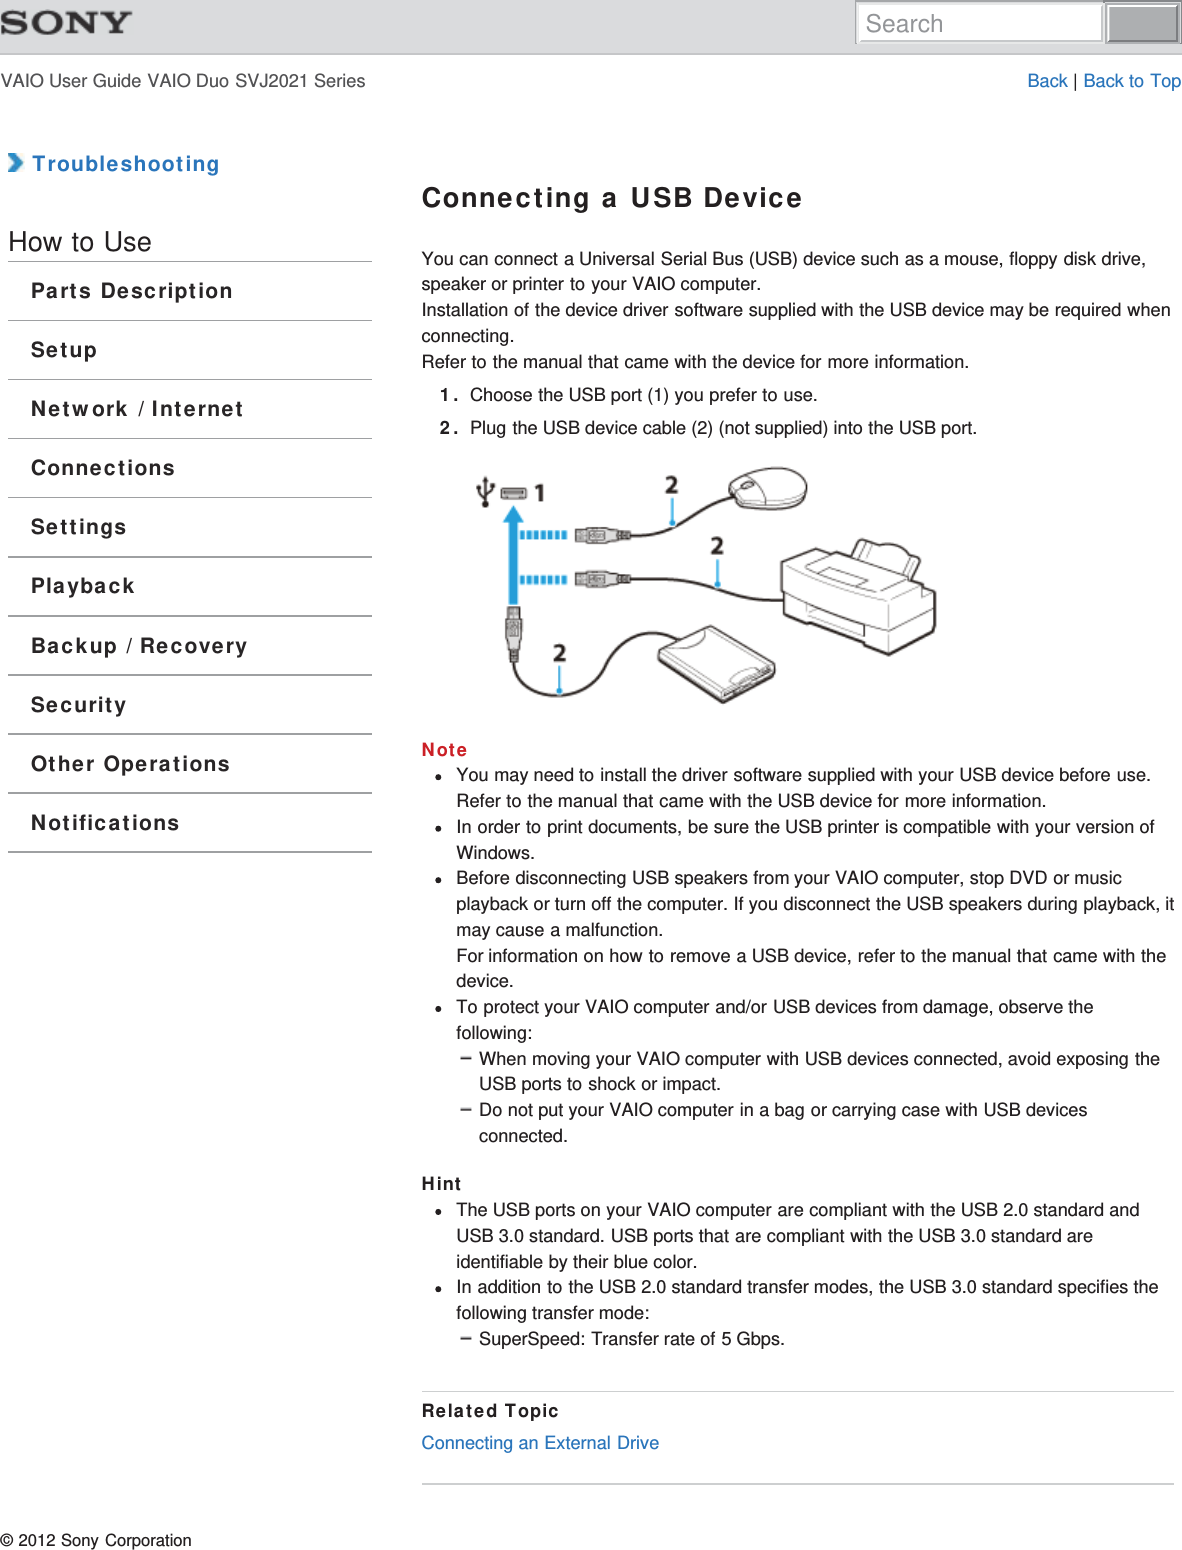 VAIO User Guide VAIO Duo SVJ2021 Series Back | Back to Top TroubleshootingHow to UseParts DescriptionSetupNetwork / InternetConnectionsSettingsPlaybackBackup / RecoverySecurityOther OperationsNotificationsConnecting a USB DeviceYou can connect a Universal Serial Bus (USB) device such as a mouse, floppy disk drive,speaker or printer to your VAIO computer.Installation of the device driver software supplied with the USB device may be required whenconnecting.Refer to the manual that came with the device for more information.1. Choose the USB port (1) you prefer to use.2. Plug the USB device cable (2) (not supplied) into the USB port.NoteYou may need to install the driver software supplied with your USB device before use.Refer to the manual that came with the USB device for more information.In order to print documents, be sure the USB printer is compatible with your version ofWindows.Before disconnecting USB speakers from your VAIO computer, stop DVD or musicplayback or turn off the computer. If you disconnect the USB speakers during playback, itmay cause a malfunction.For information on how to remove a USB device, refer to the manual that came with thedevice.To protect your VAIO computer and/or USB devices from damage, observe thefollowing:When moving your VAIO computer with USB devices connected, avoid exposing theUSB ports to shock or impact.Do not put your VAIO computer in a bag or carrying case with USB devicesconnected.HintThe USB ports on your VAIO computer are compliant with the USB 2.0 standard andUSB 3.0 standard. USB ports that are compliant with the USB 3.0 standard areidentifiable by their blue color.In addition to the USB 2.0 standard transfer modes, the USB 3.0 standard specifies thefollowing transfer mode:SuperSpeed: Transfer rate of 5 Gbps.Related TopicConnecting an External Drive© 2012 Sony CorporationSearch